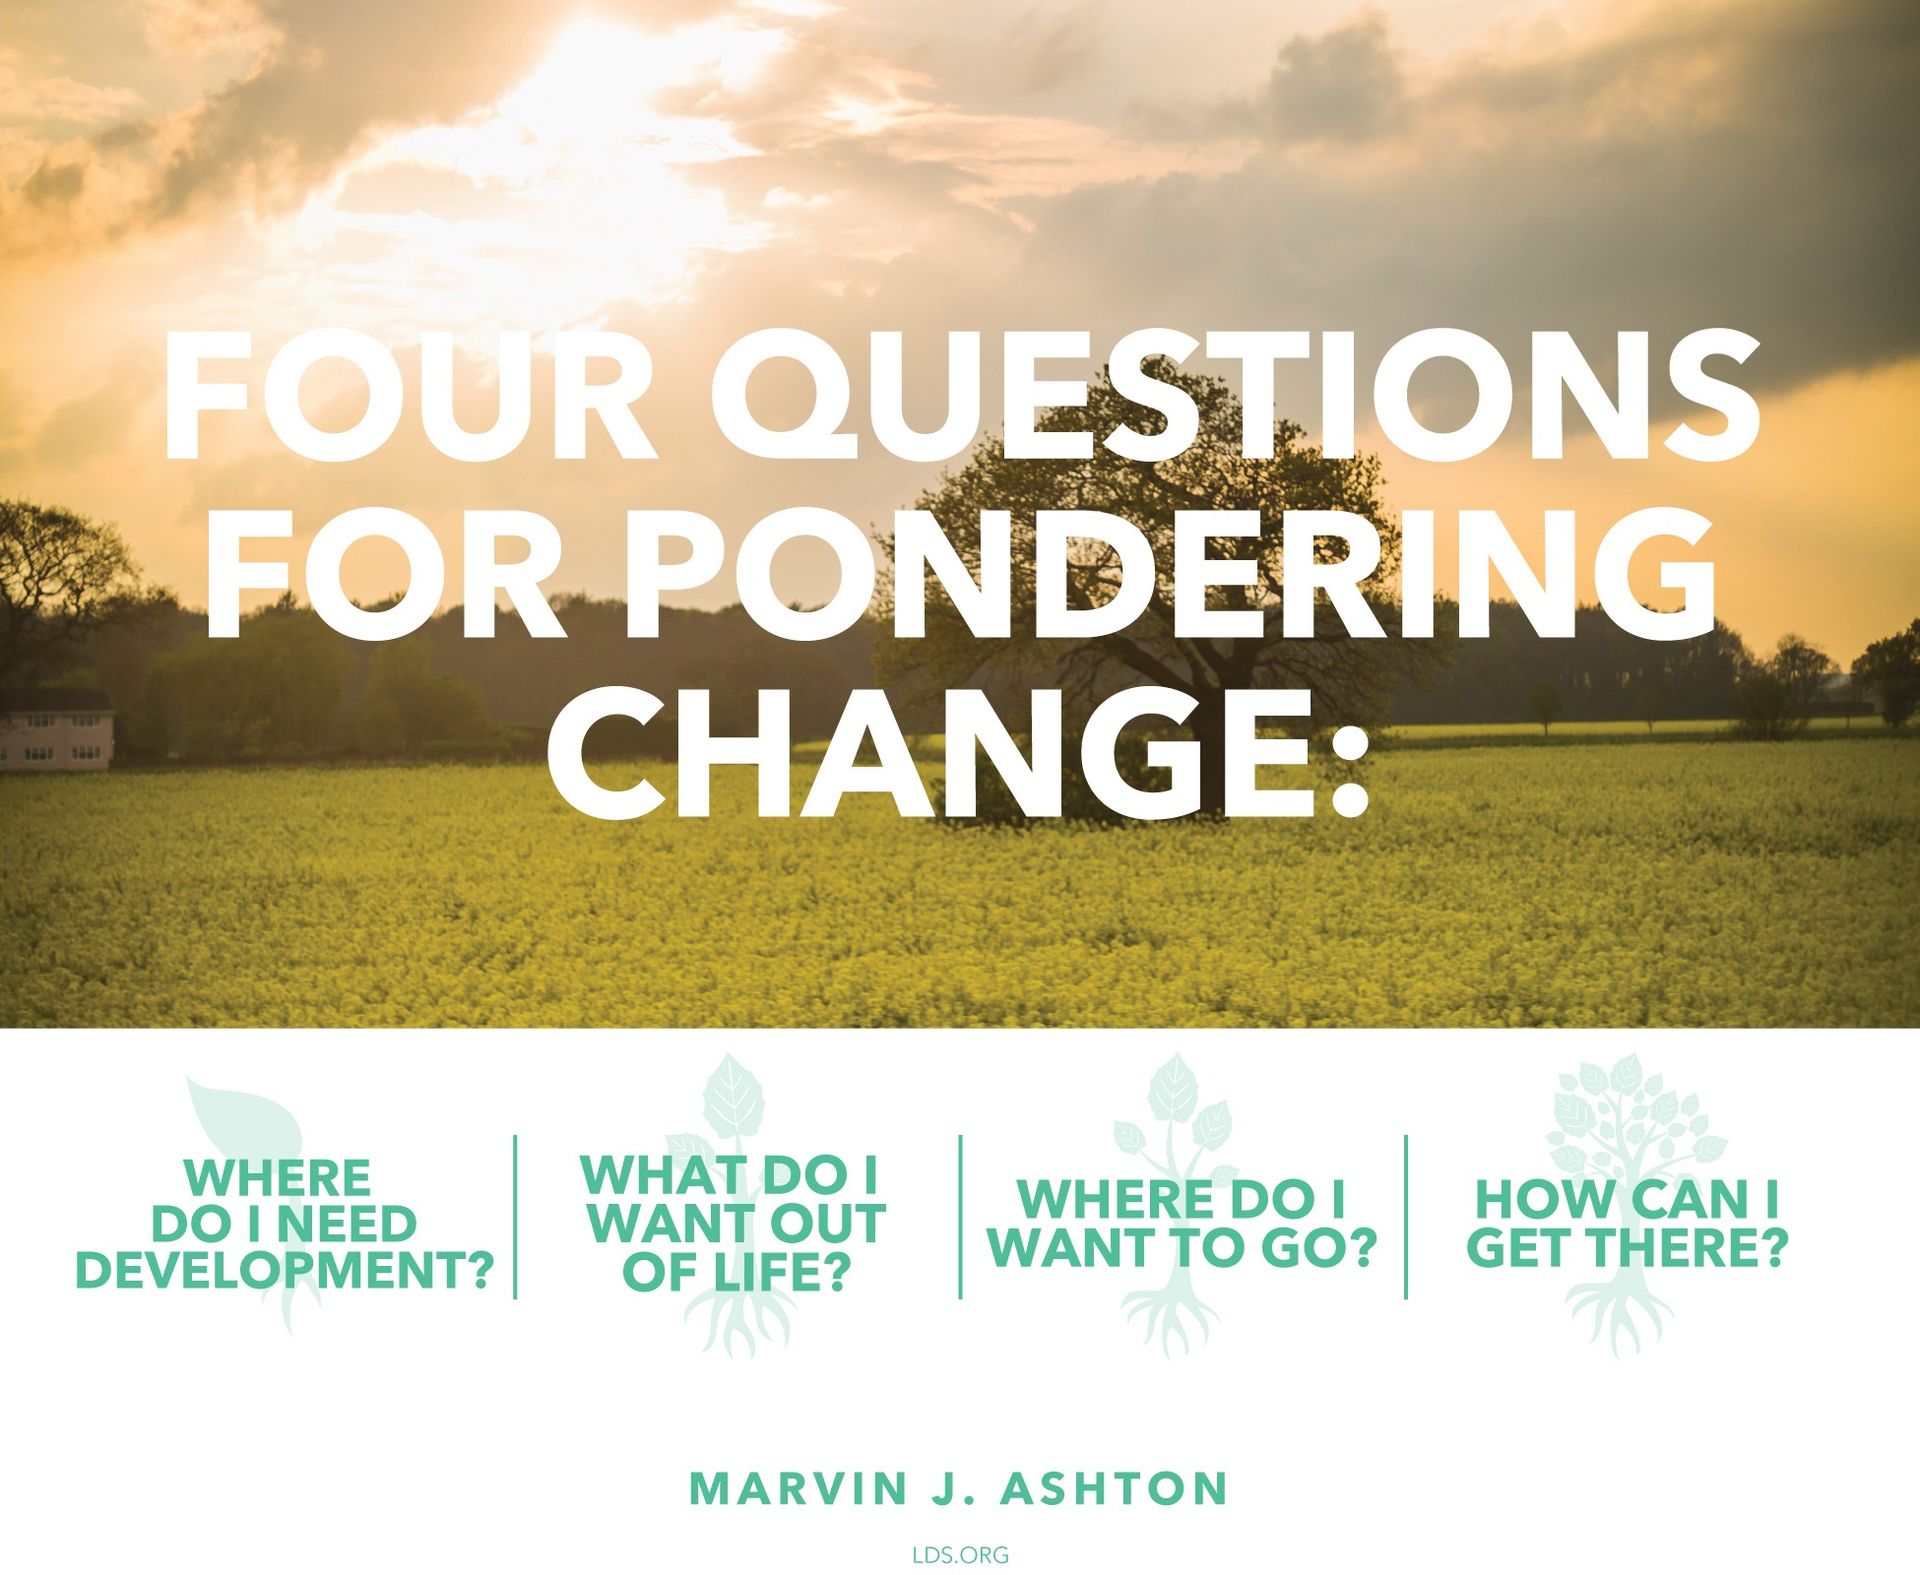 Four questions for pondering change: “Where do I need development? What do I want out of life? Where do I want to go? How can I get there?”—Elder Marvin J. Ashton, “Progress through Change” © See Individual Images ipCode 1.